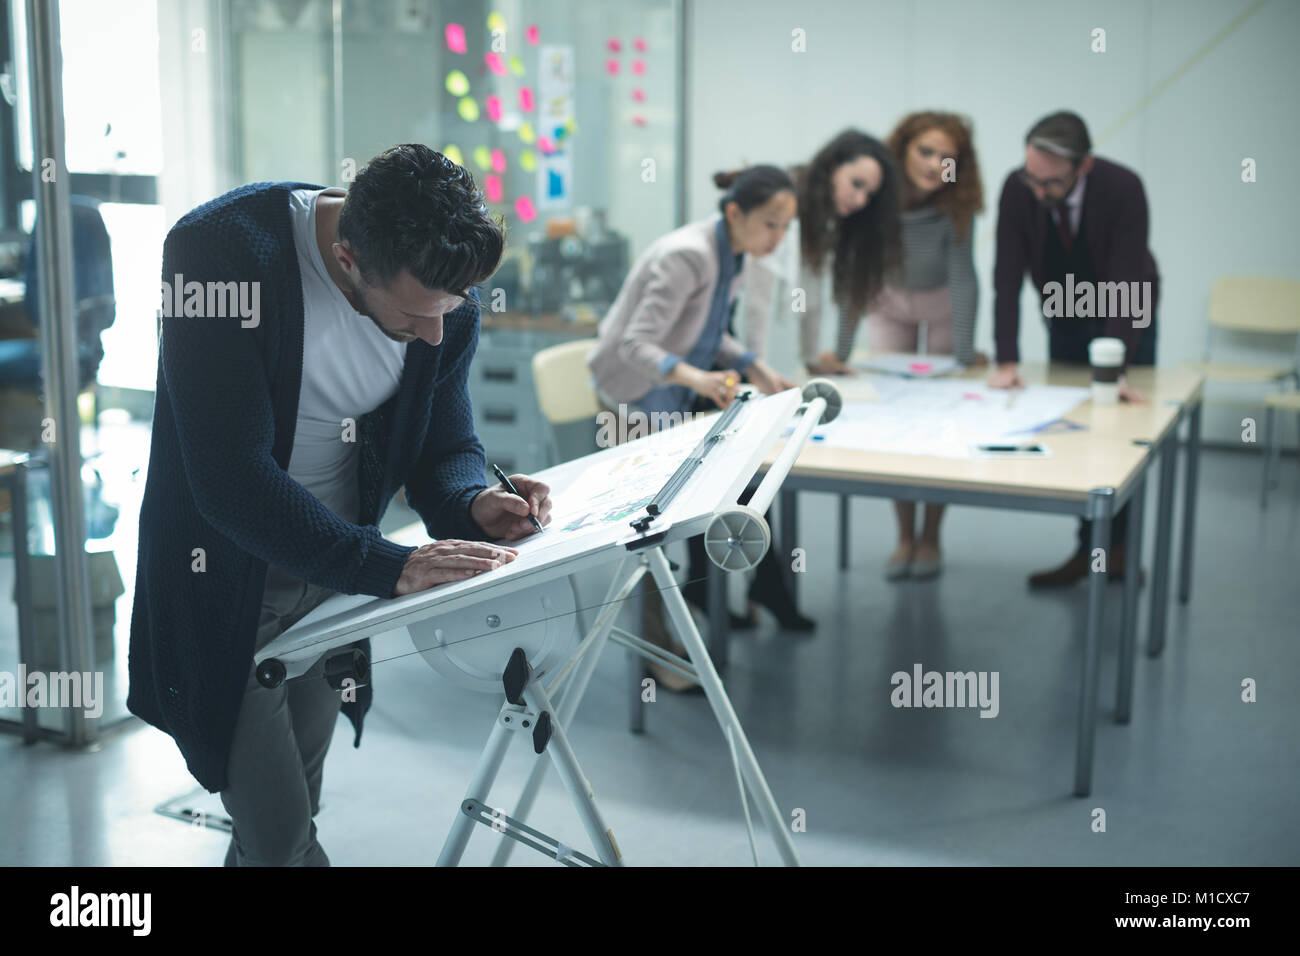 Male executive working over drafting table Stock Photo